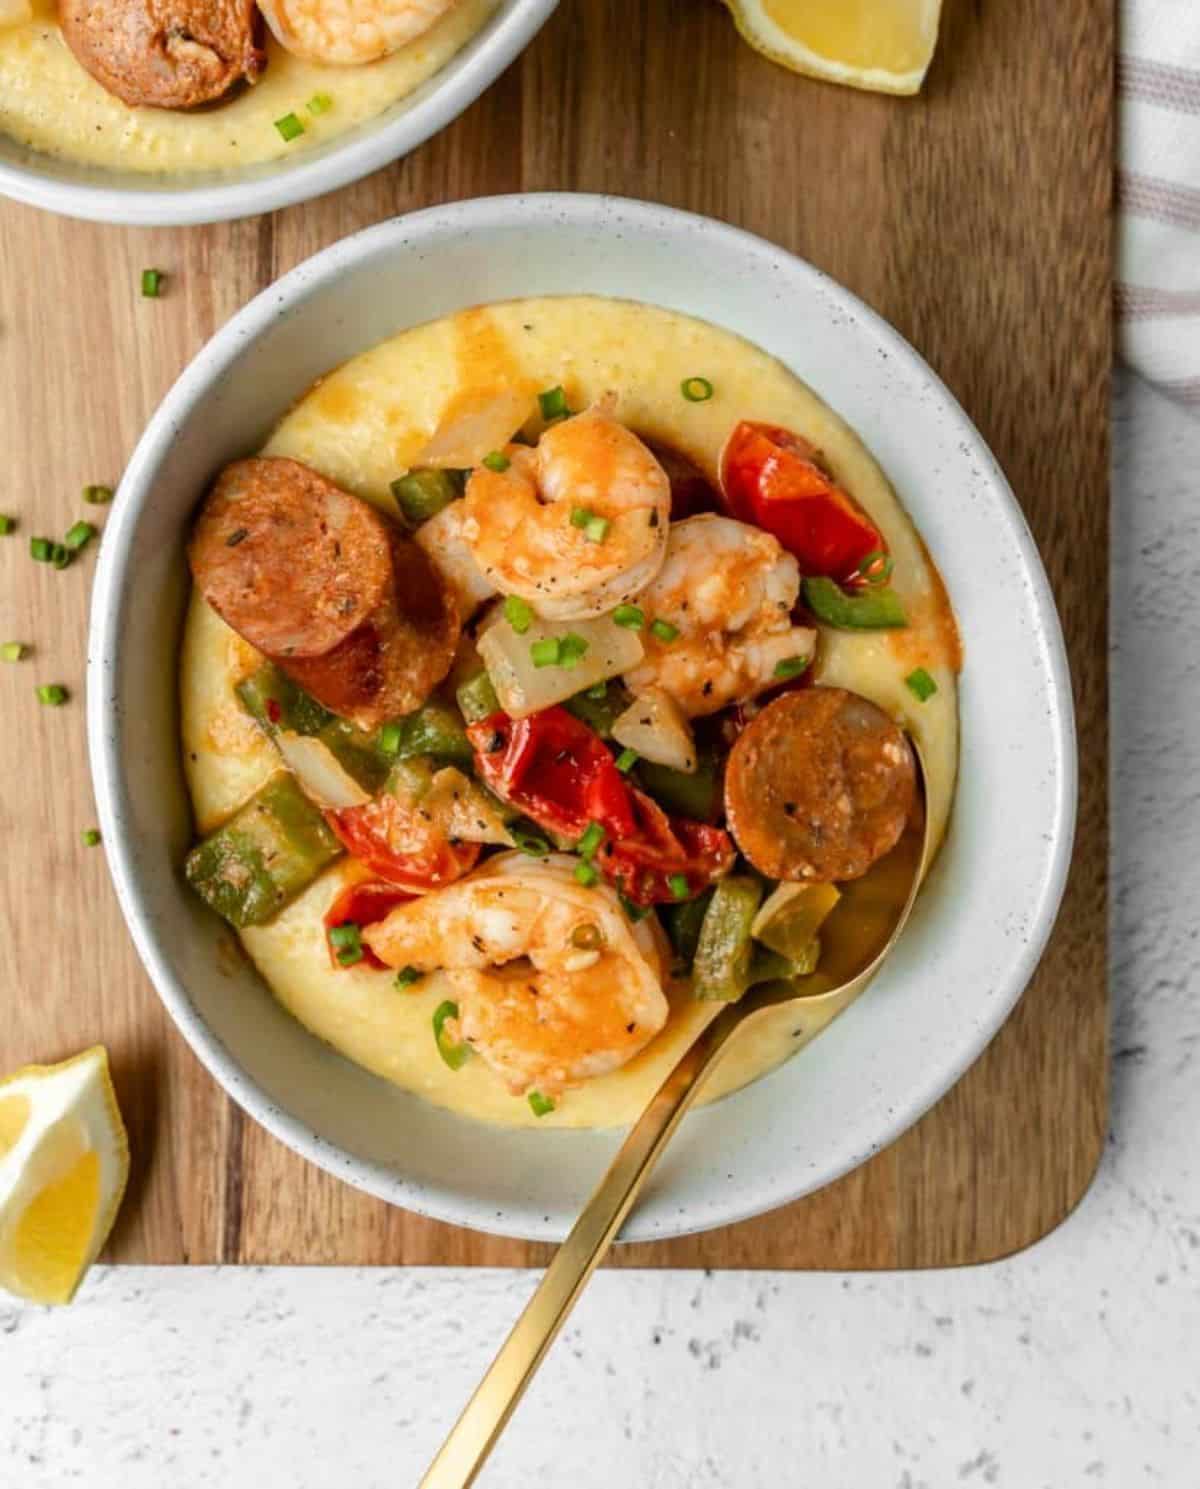 Juicy shrimp and grits with chicken sausagein a bowl with a spoon.